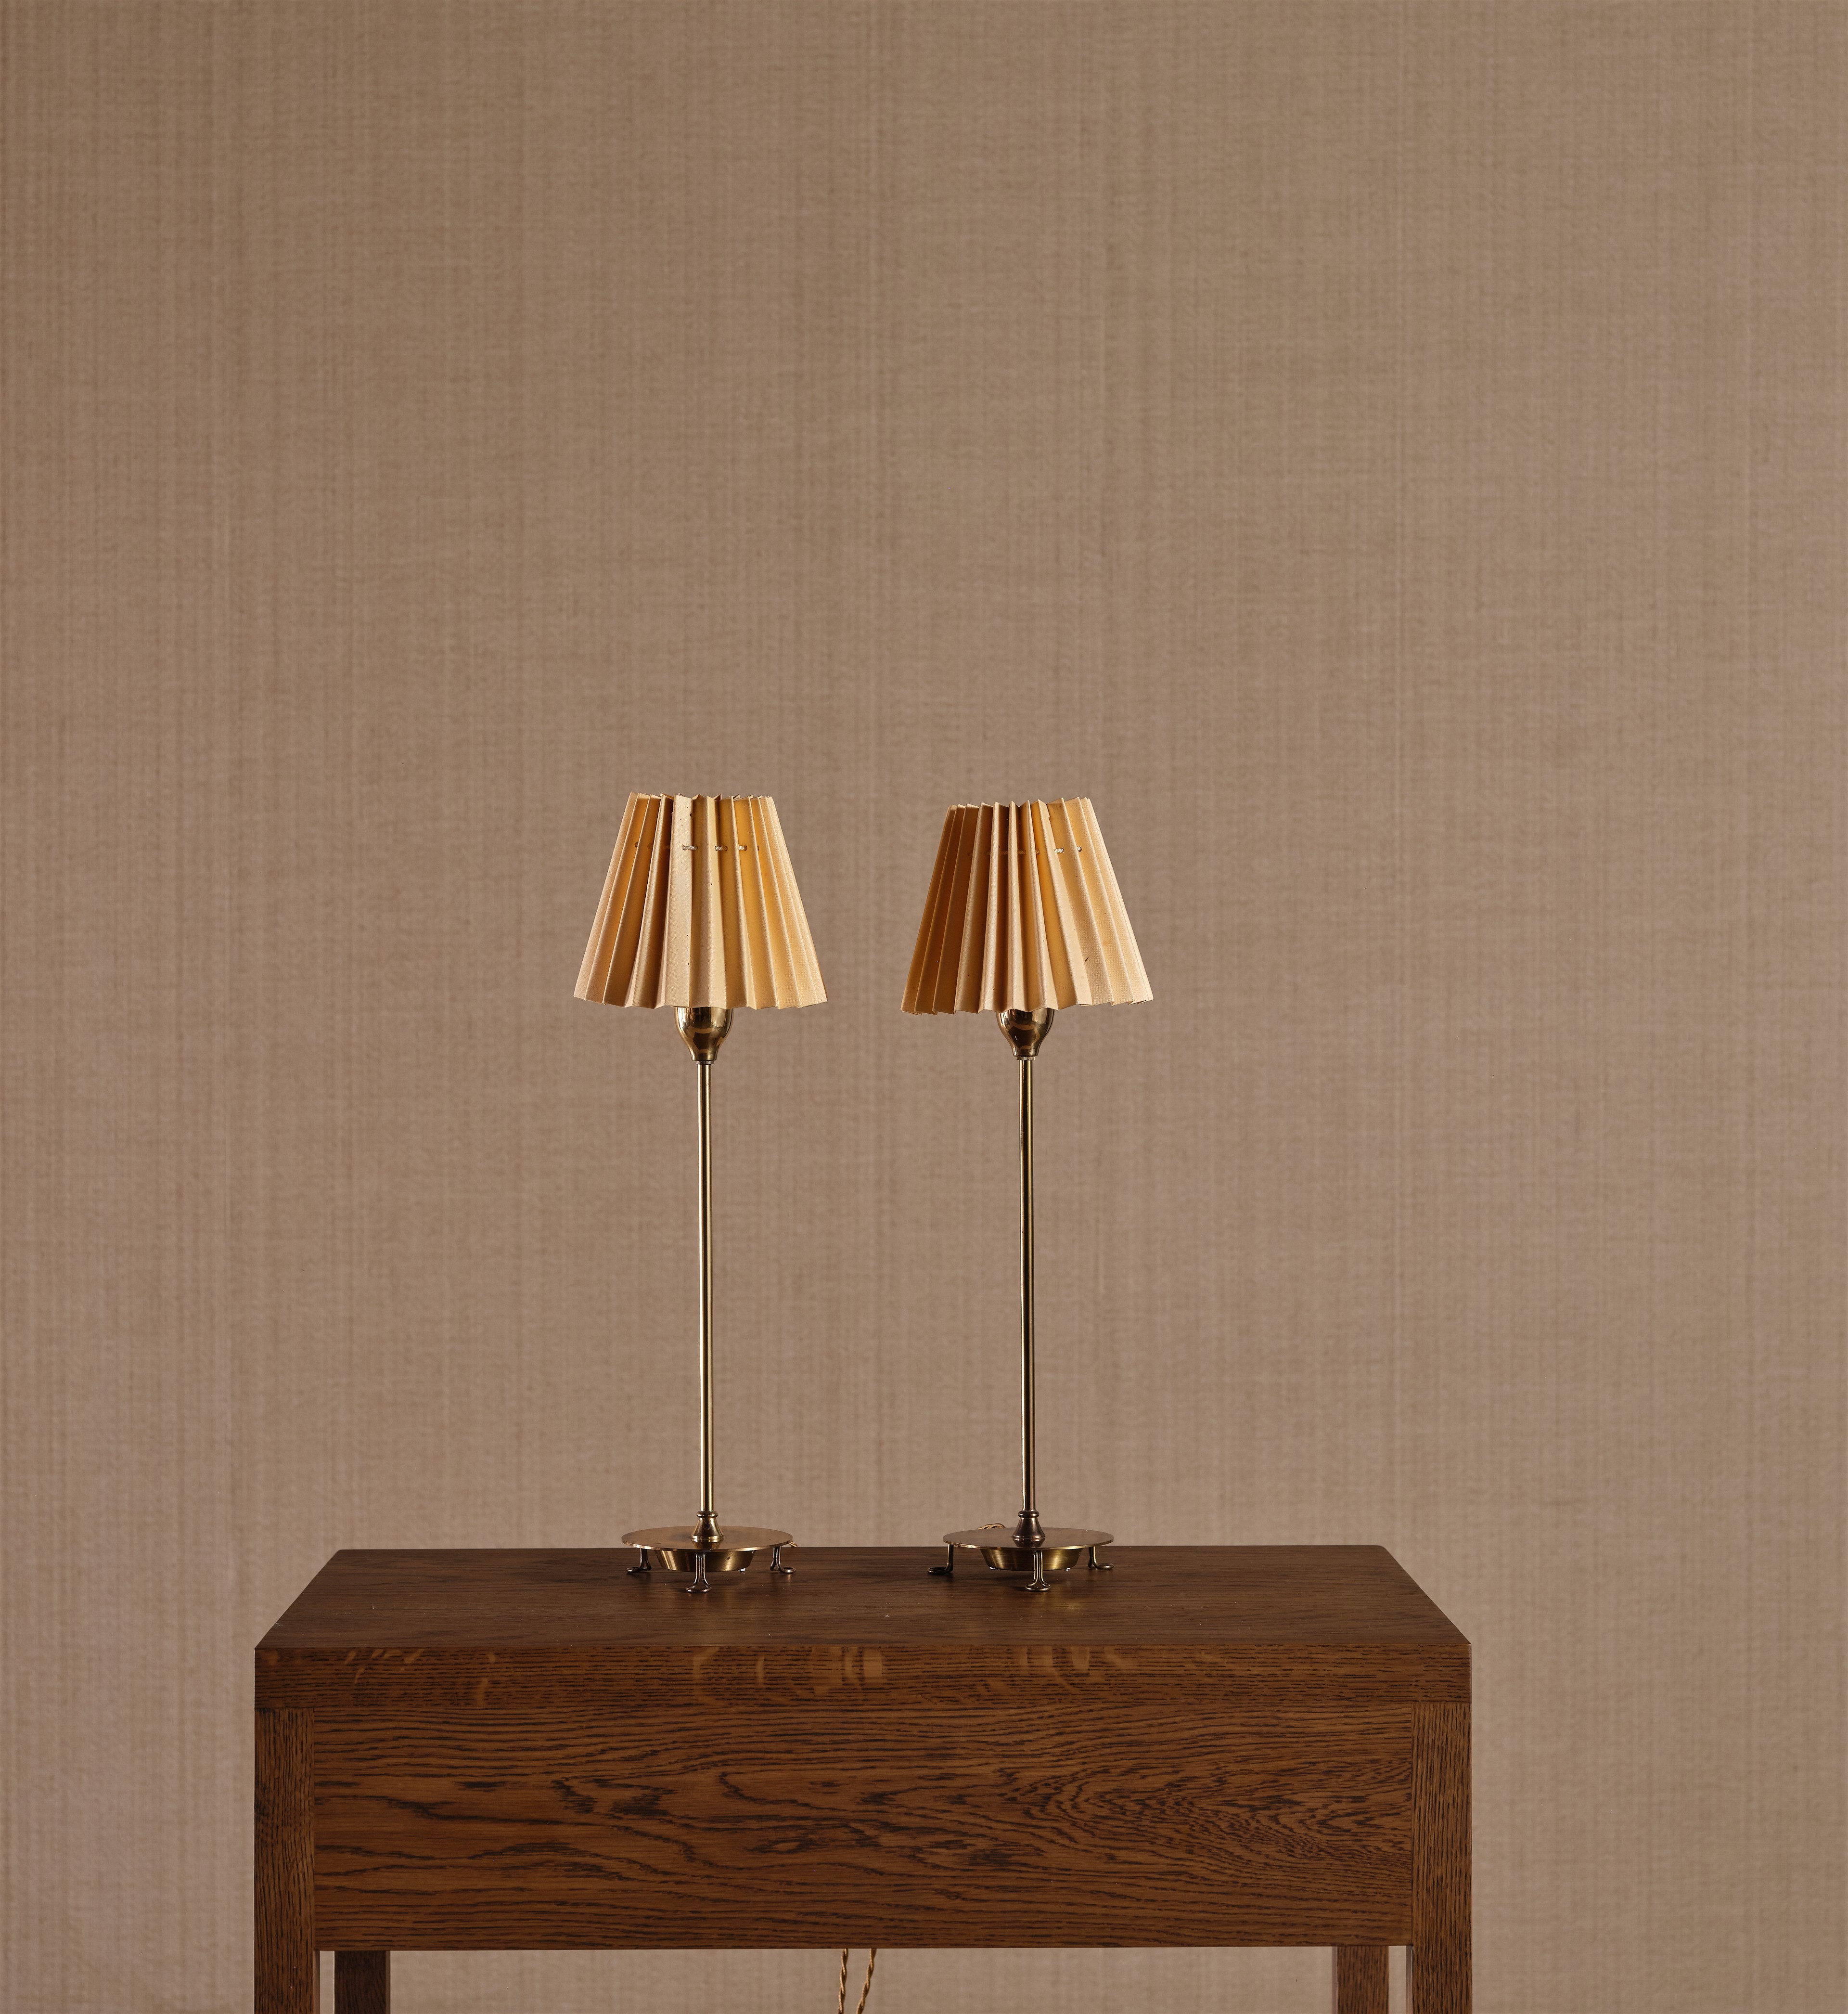 a couple of lamps sitting on top of a wooden table